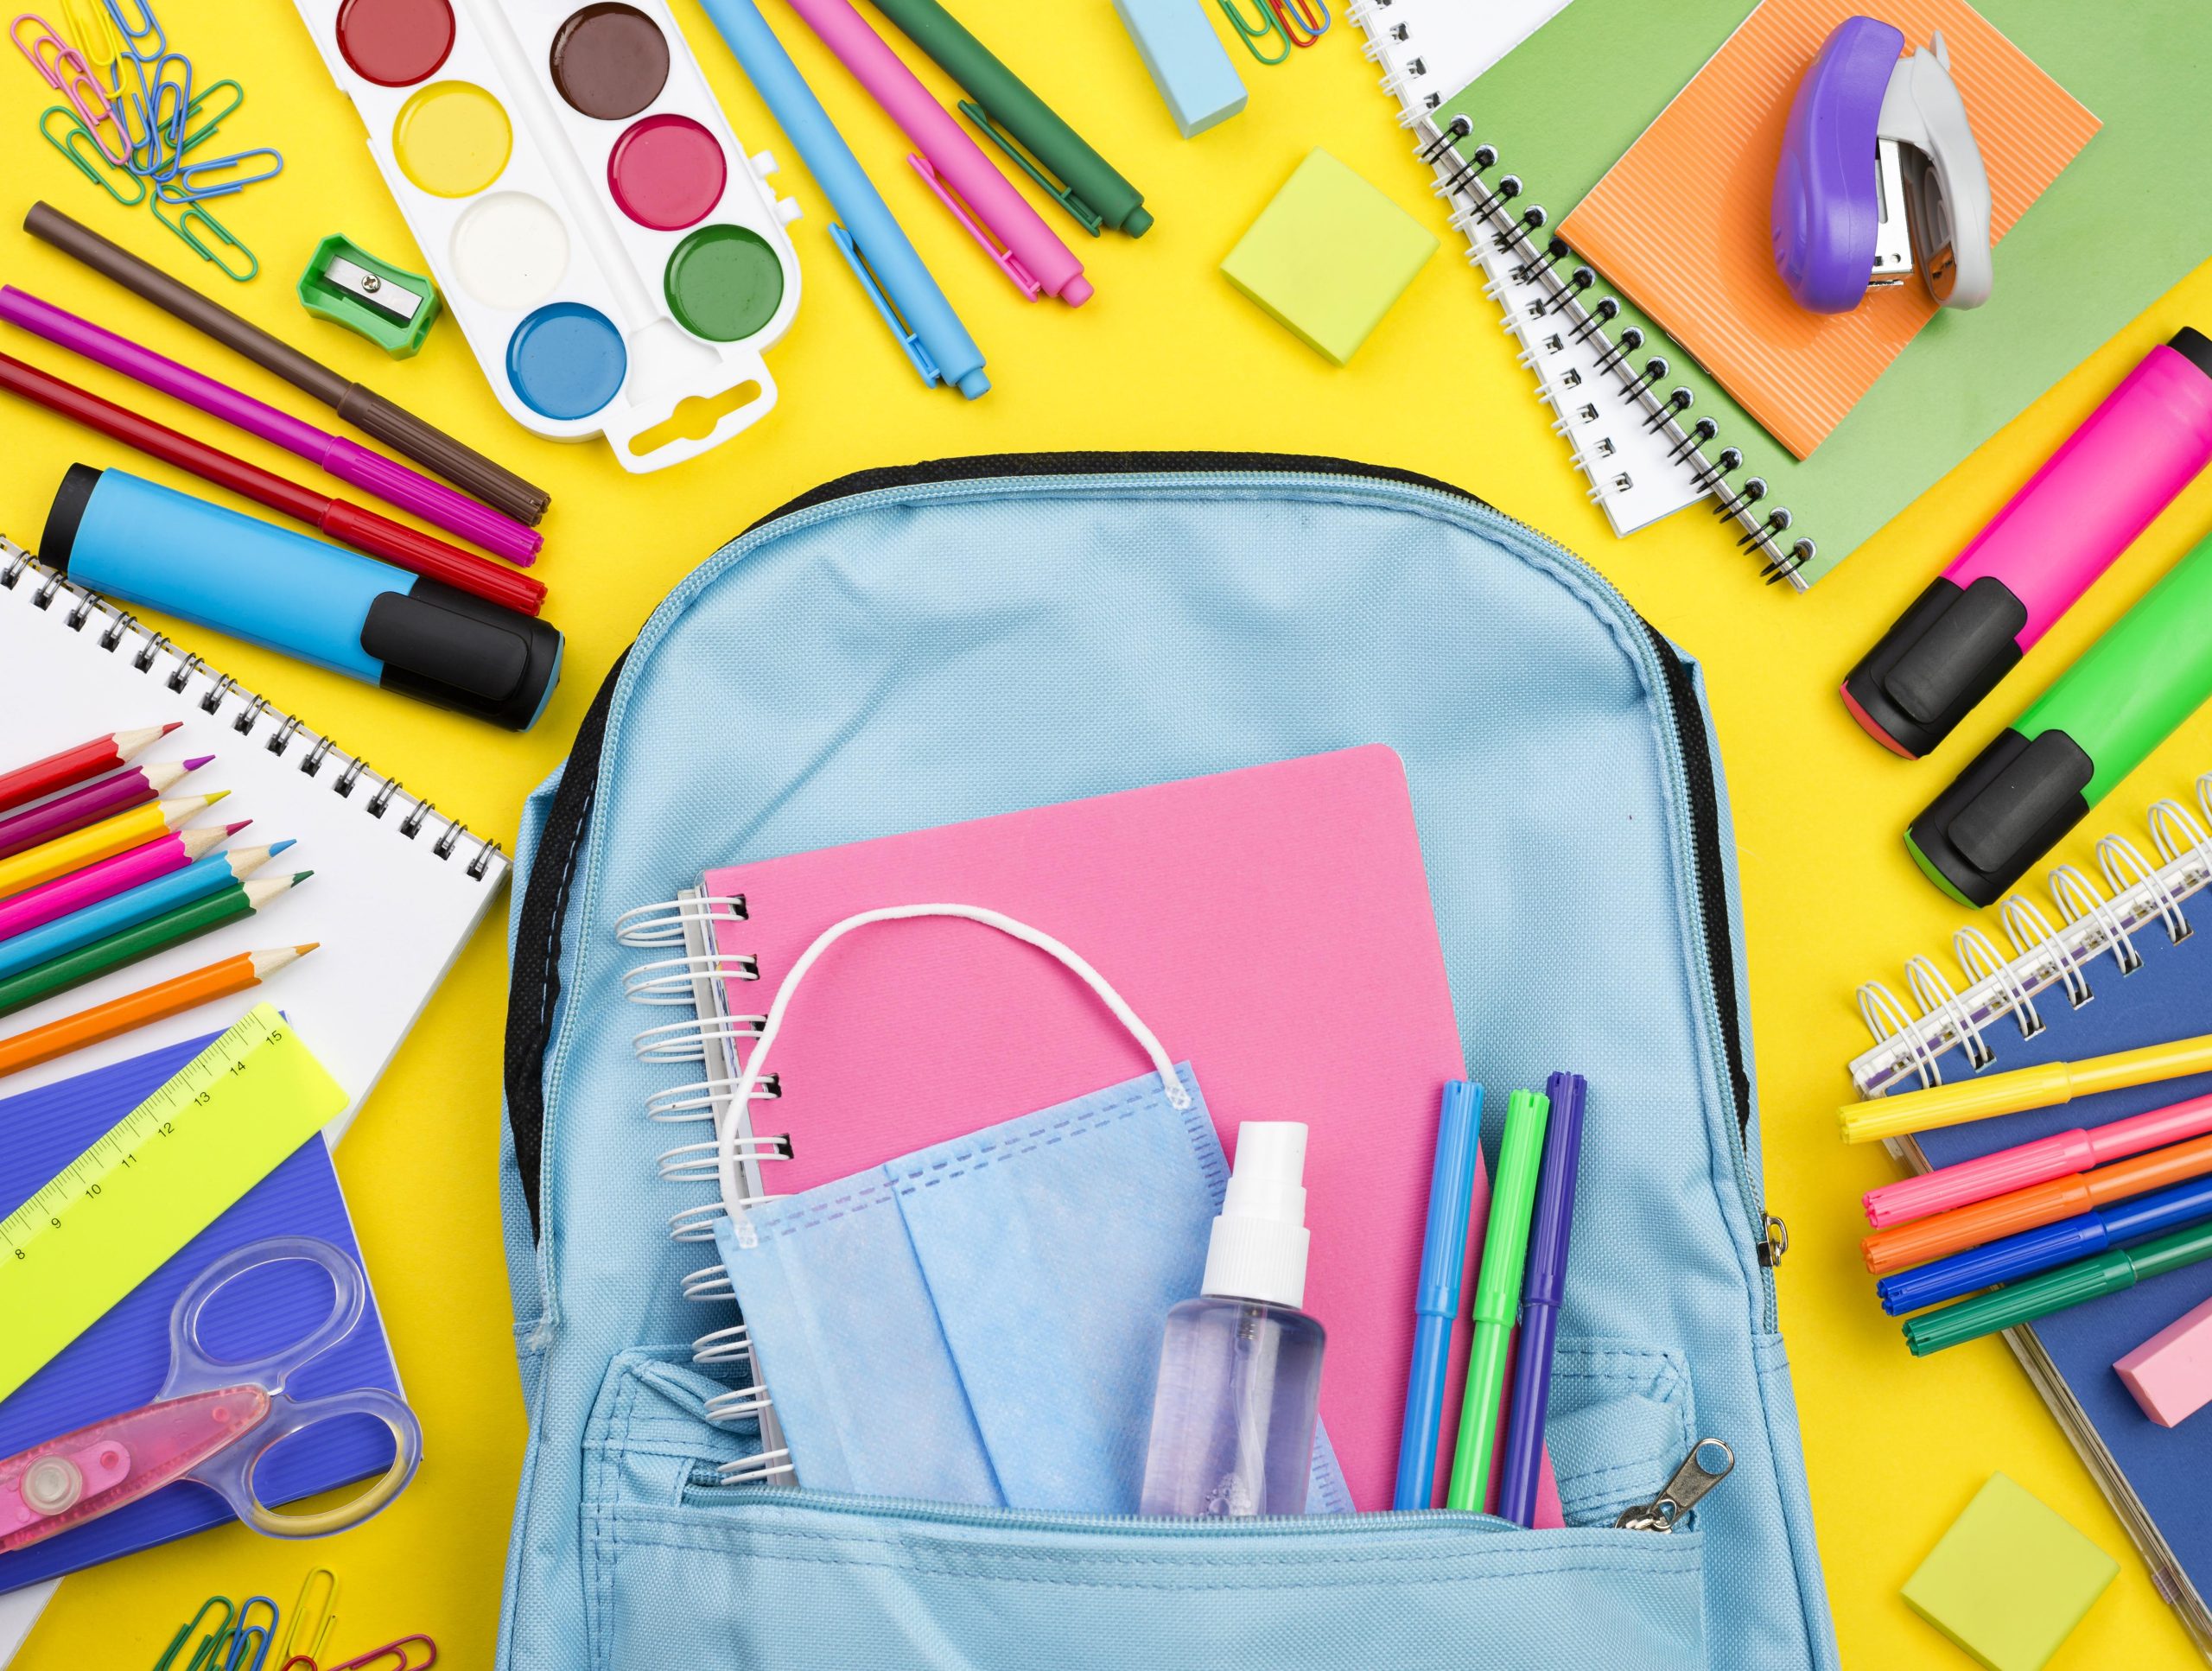 flat-lay-school-essentials-with-multicolored-pencils-backpack